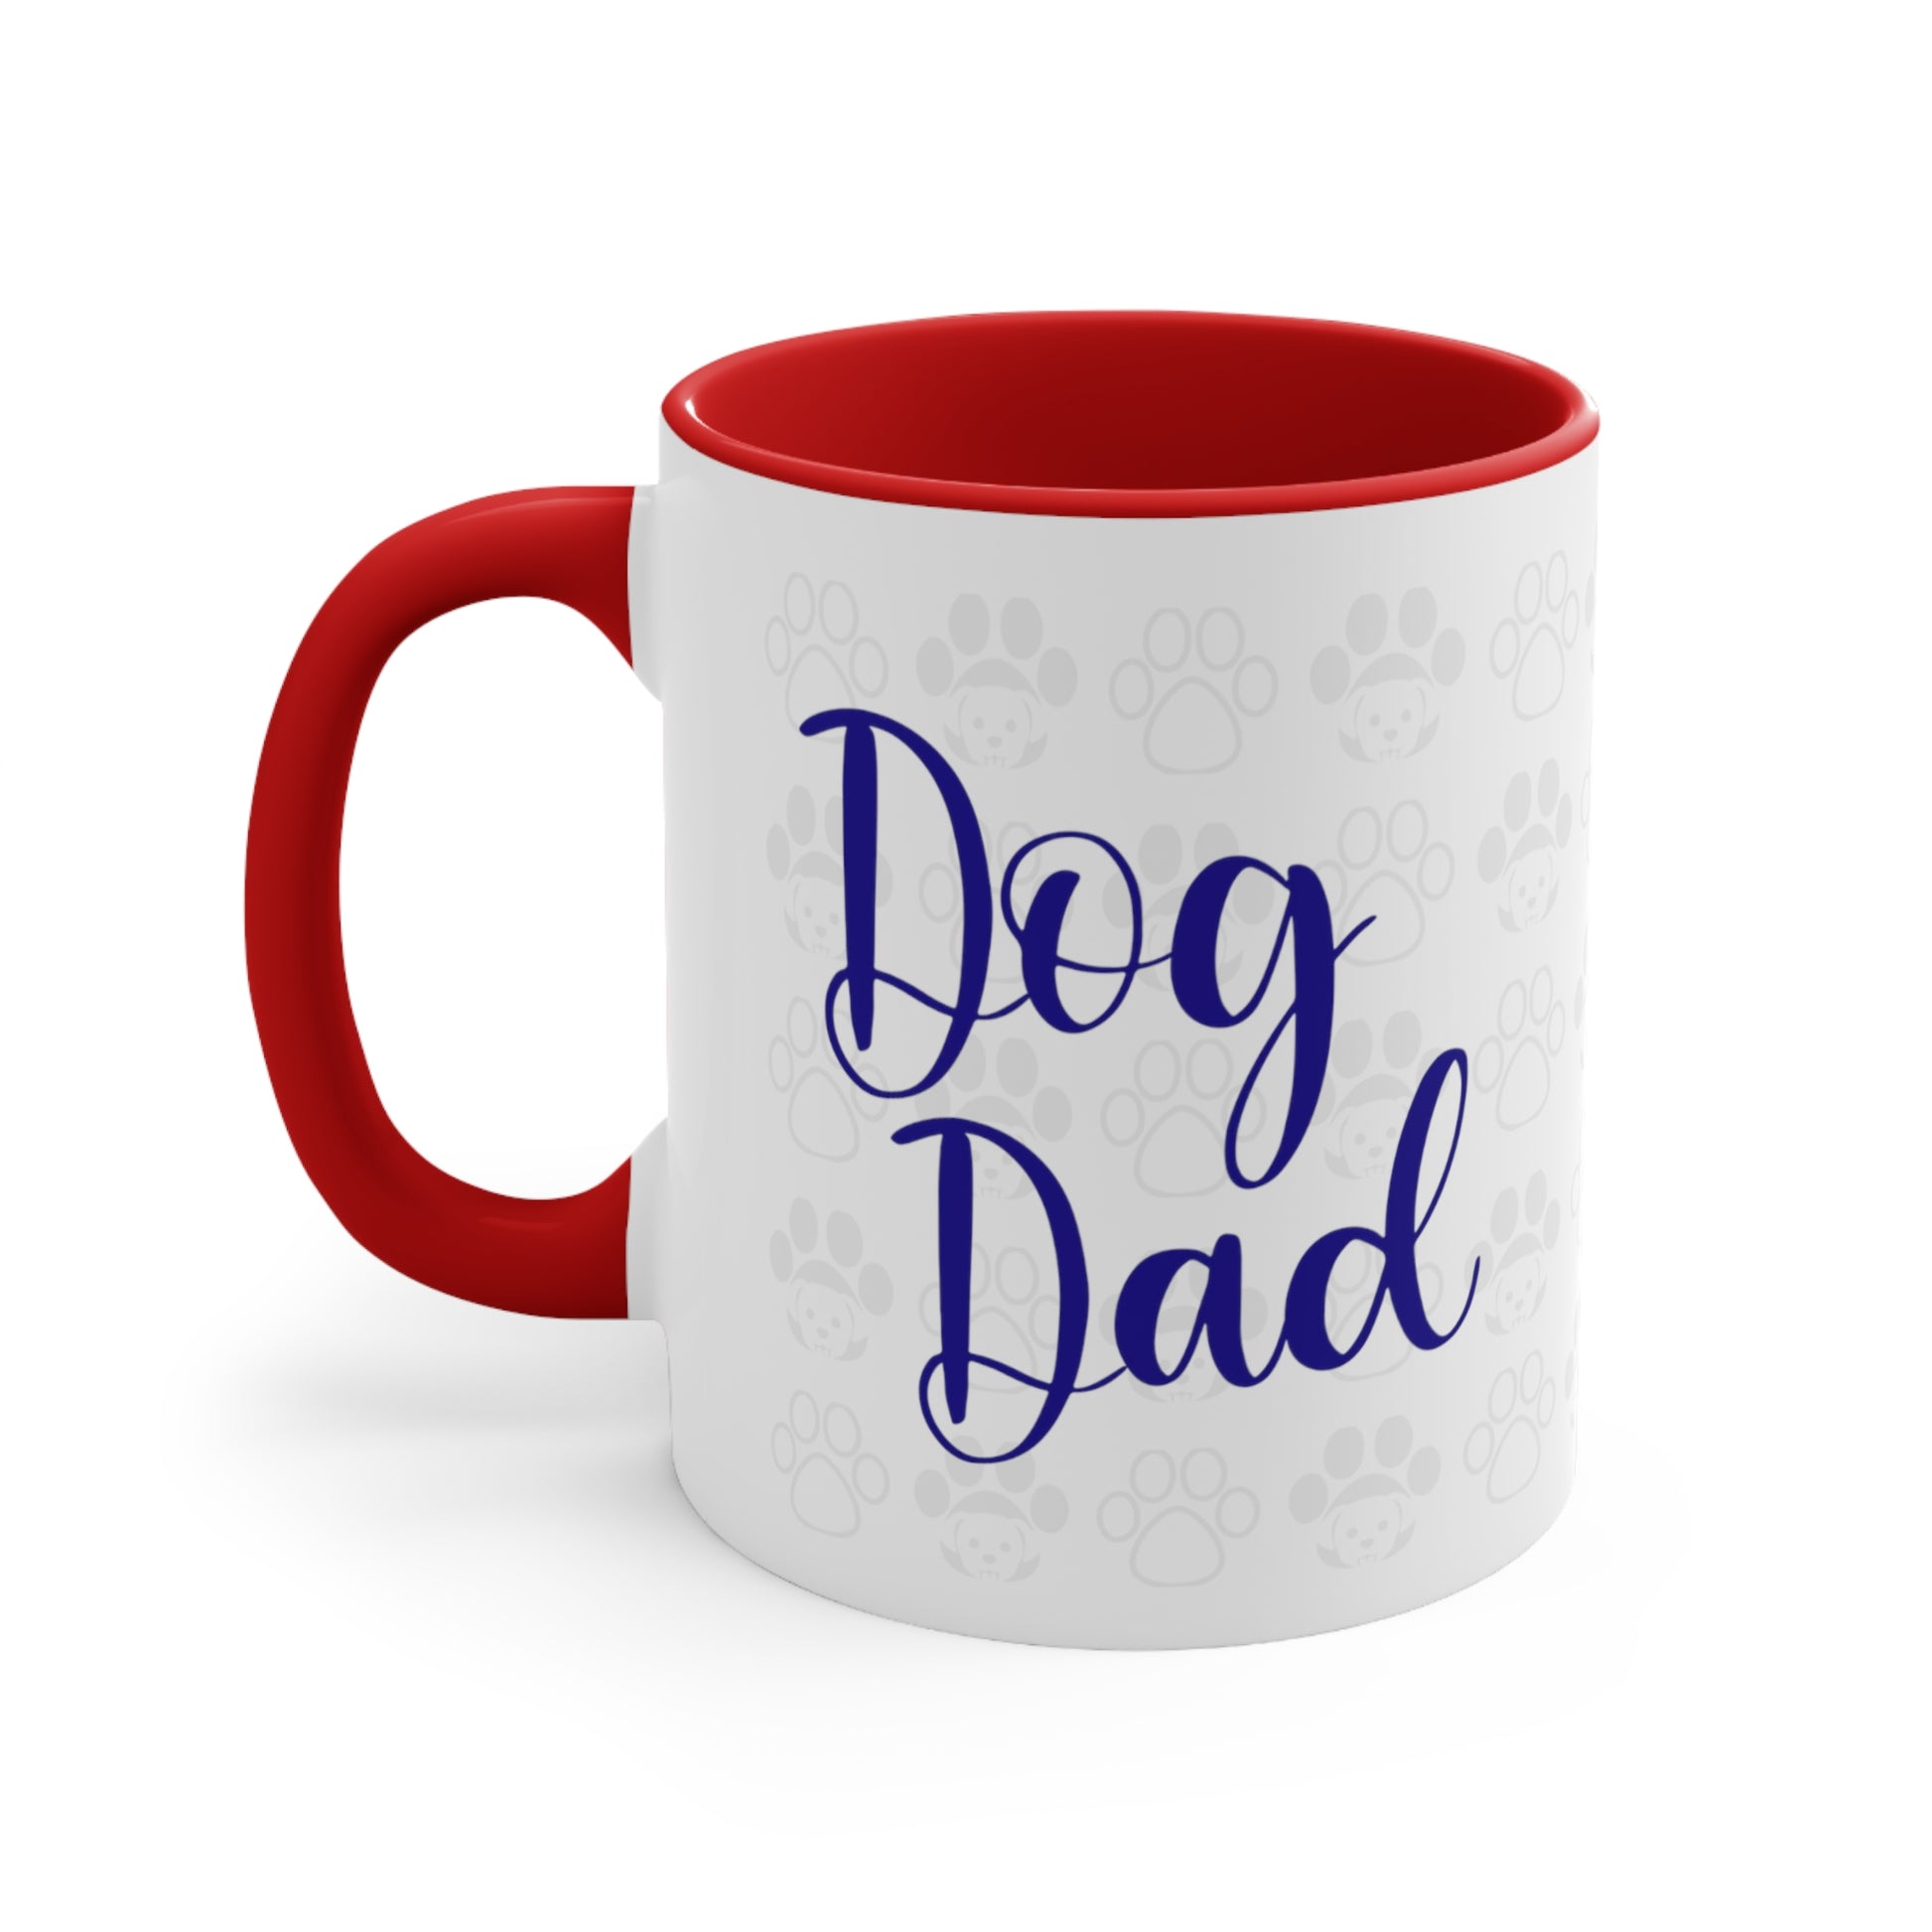 Dog Dad coffee Mug 11 oz, front view in red.